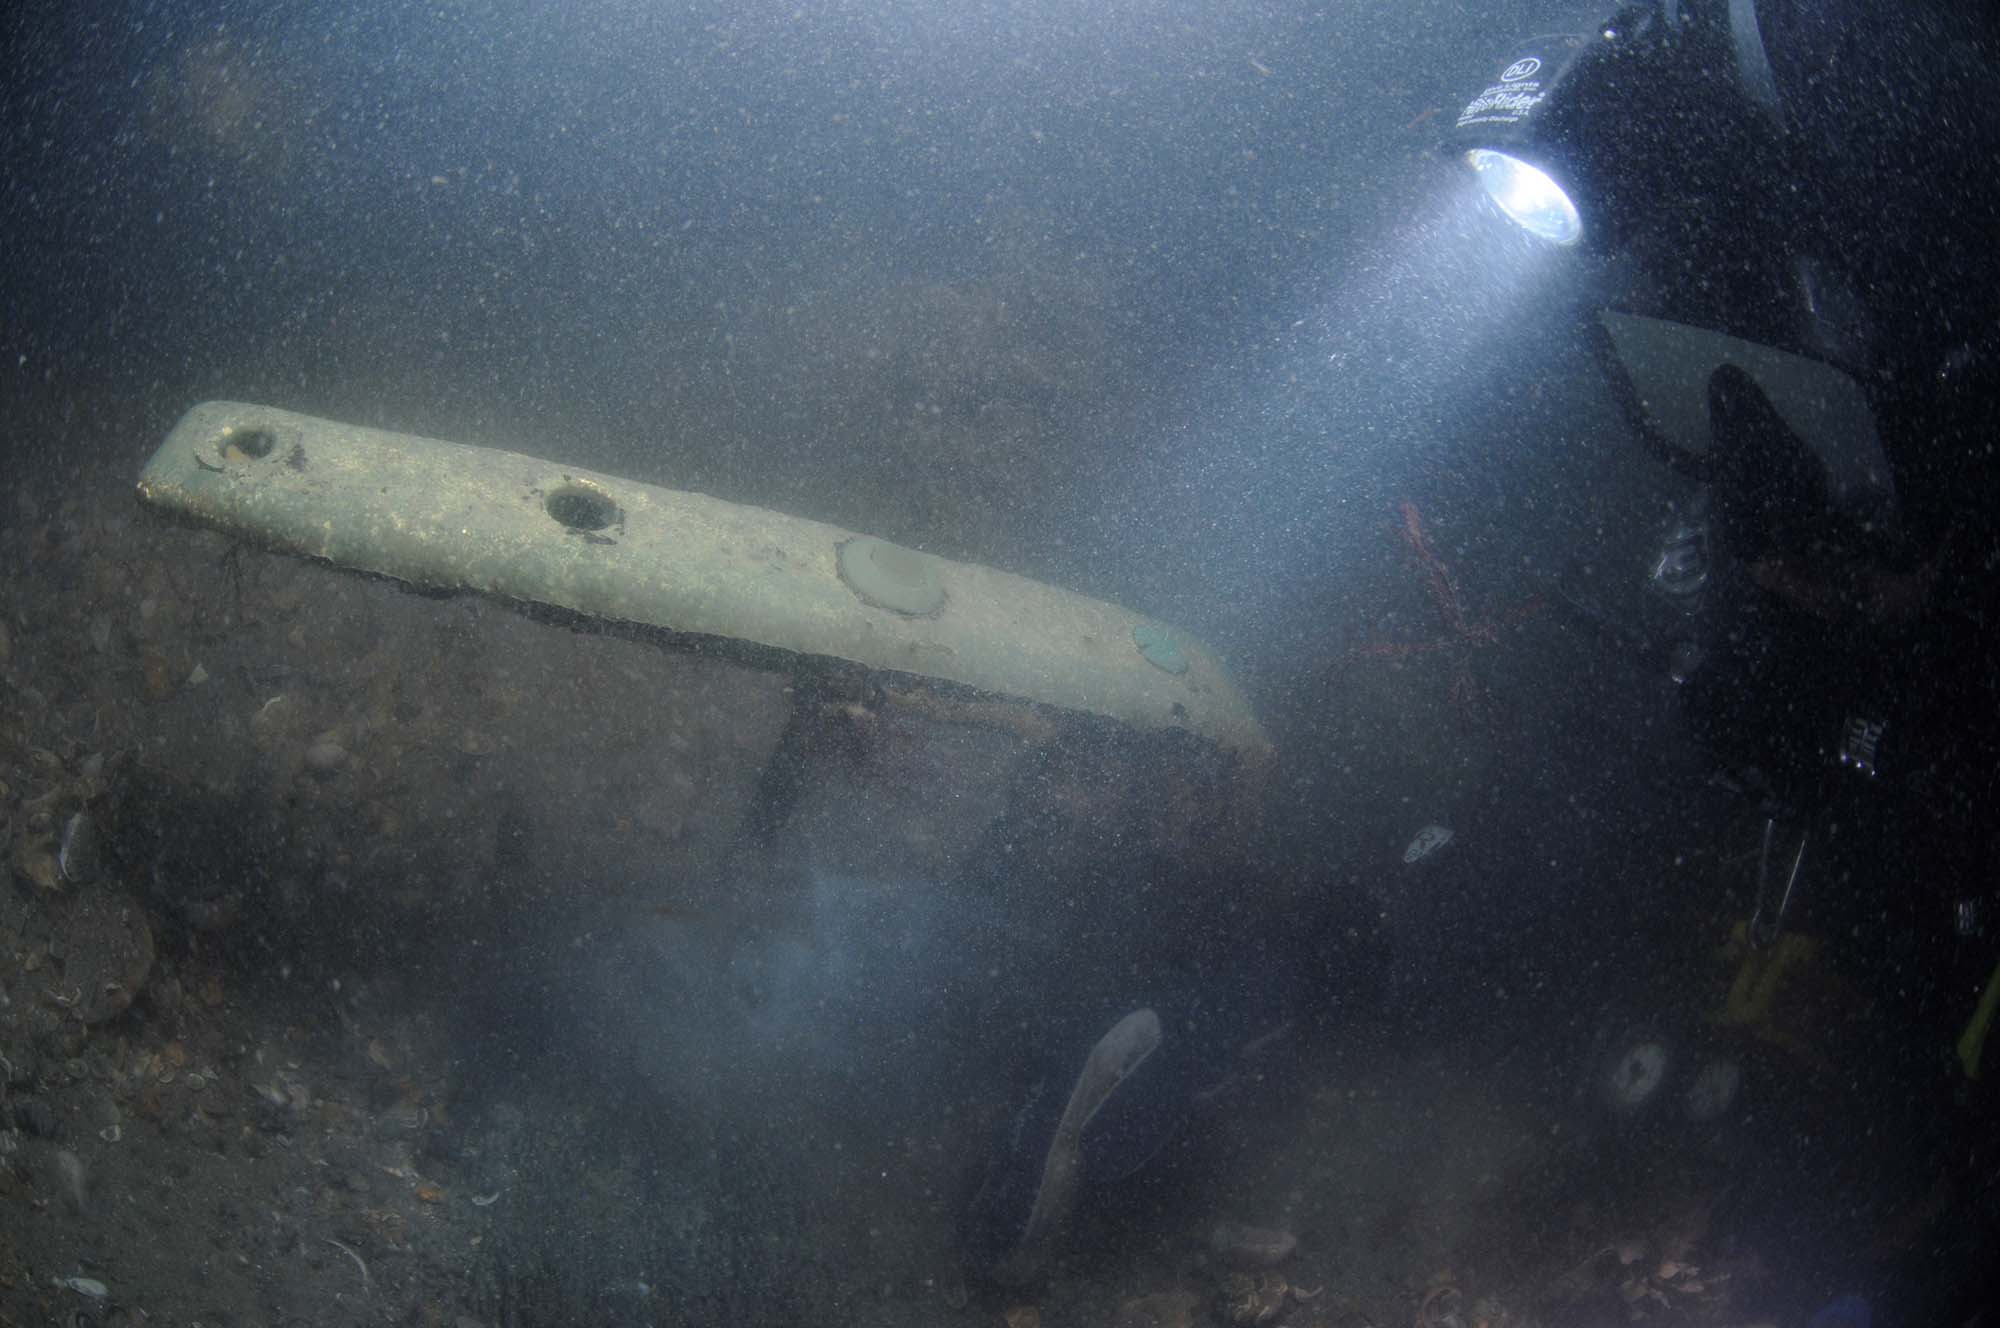 Thorness Bay wreck